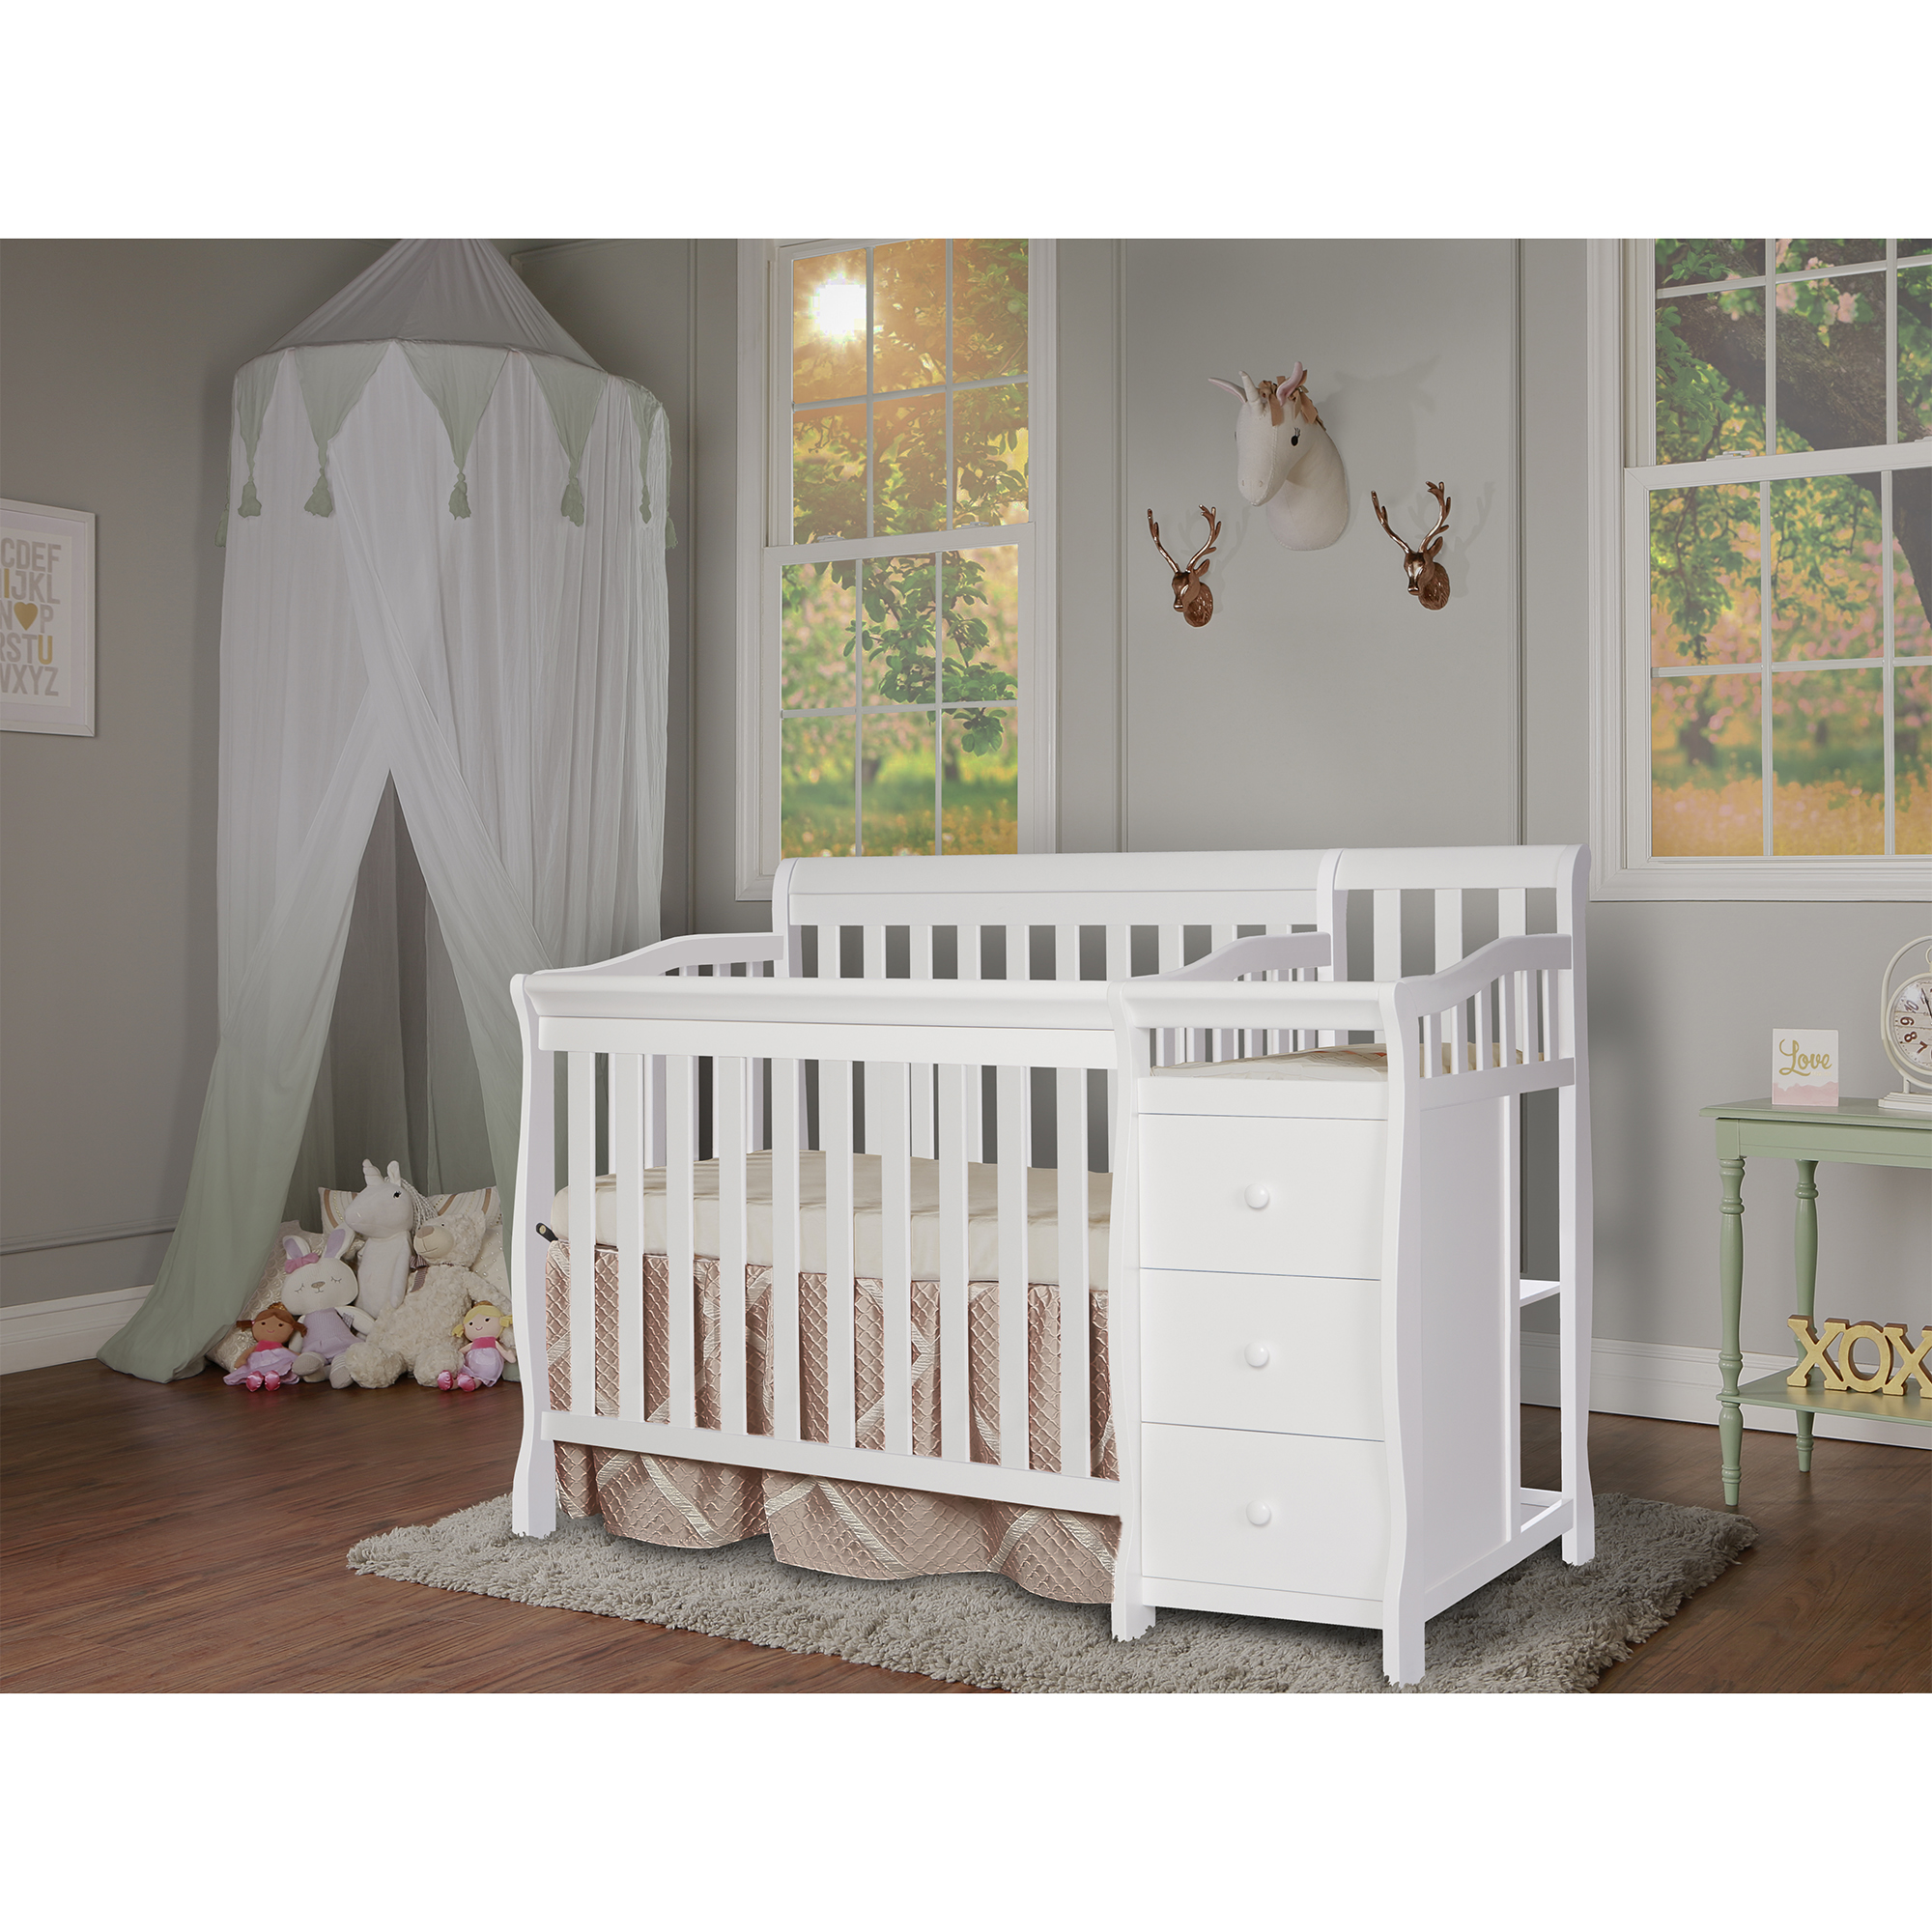 Dream On Me Jayden 4-in-1 Mini Convertible Crib and Changer, White - image 3 of 6